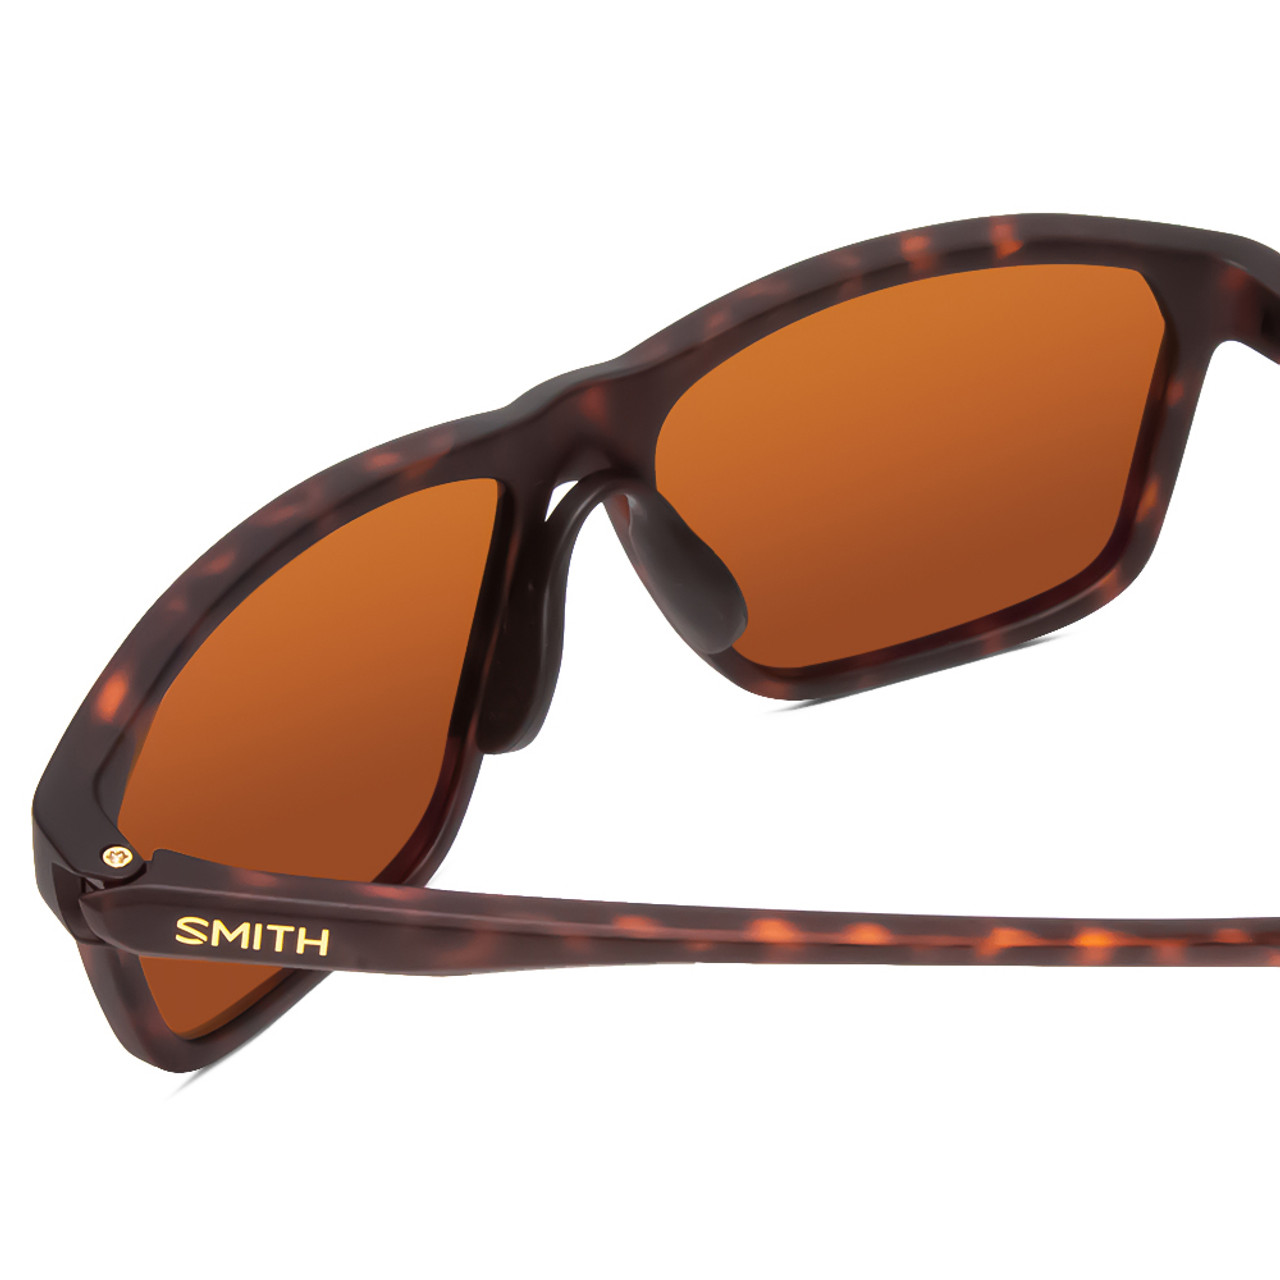 Close Up View of Smith Pinpoint Unisex Sunglasses in Tortoise Gold/ChromaPop Polarized Brown 59mm